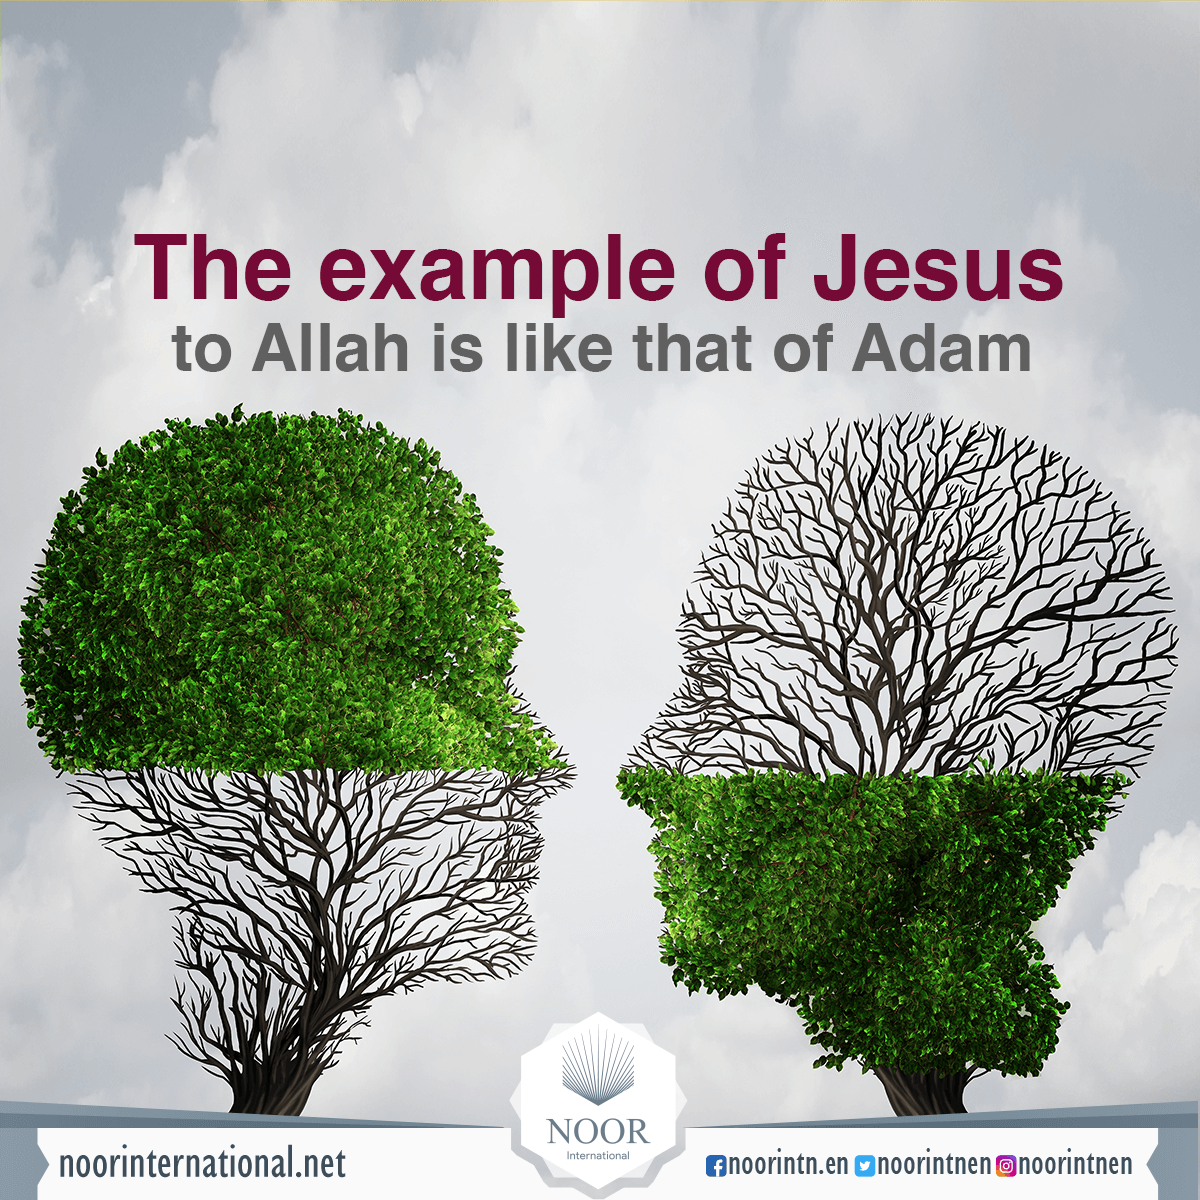 The example of Jesus to Allah1 is like that of Adam